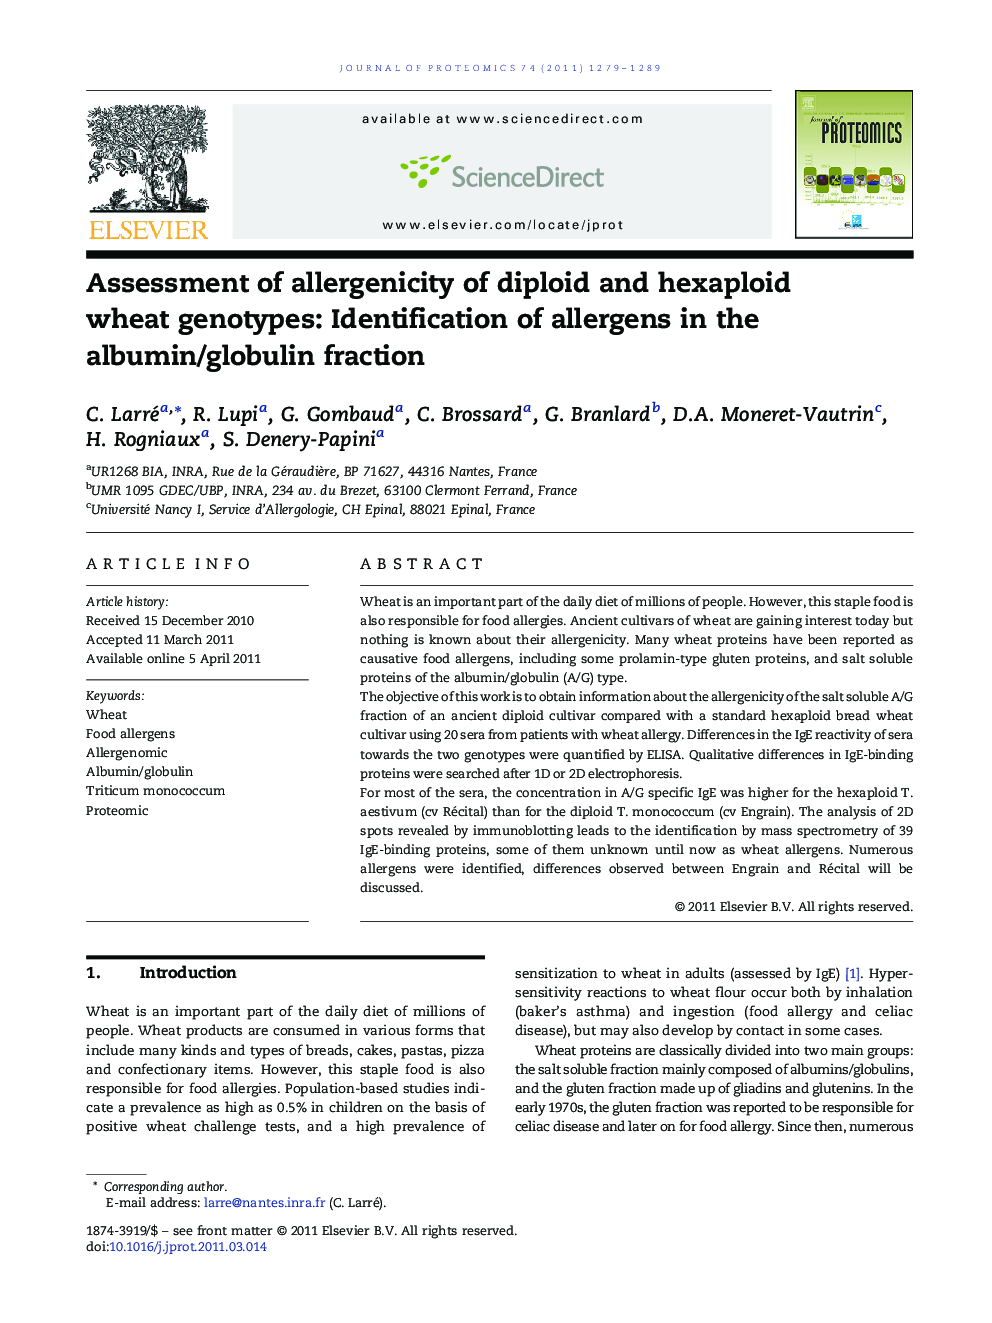 Assessment of allergenicity of diploid and hexaploid wheat genotypes: Identification of allergens in the albumin/globulin fraction